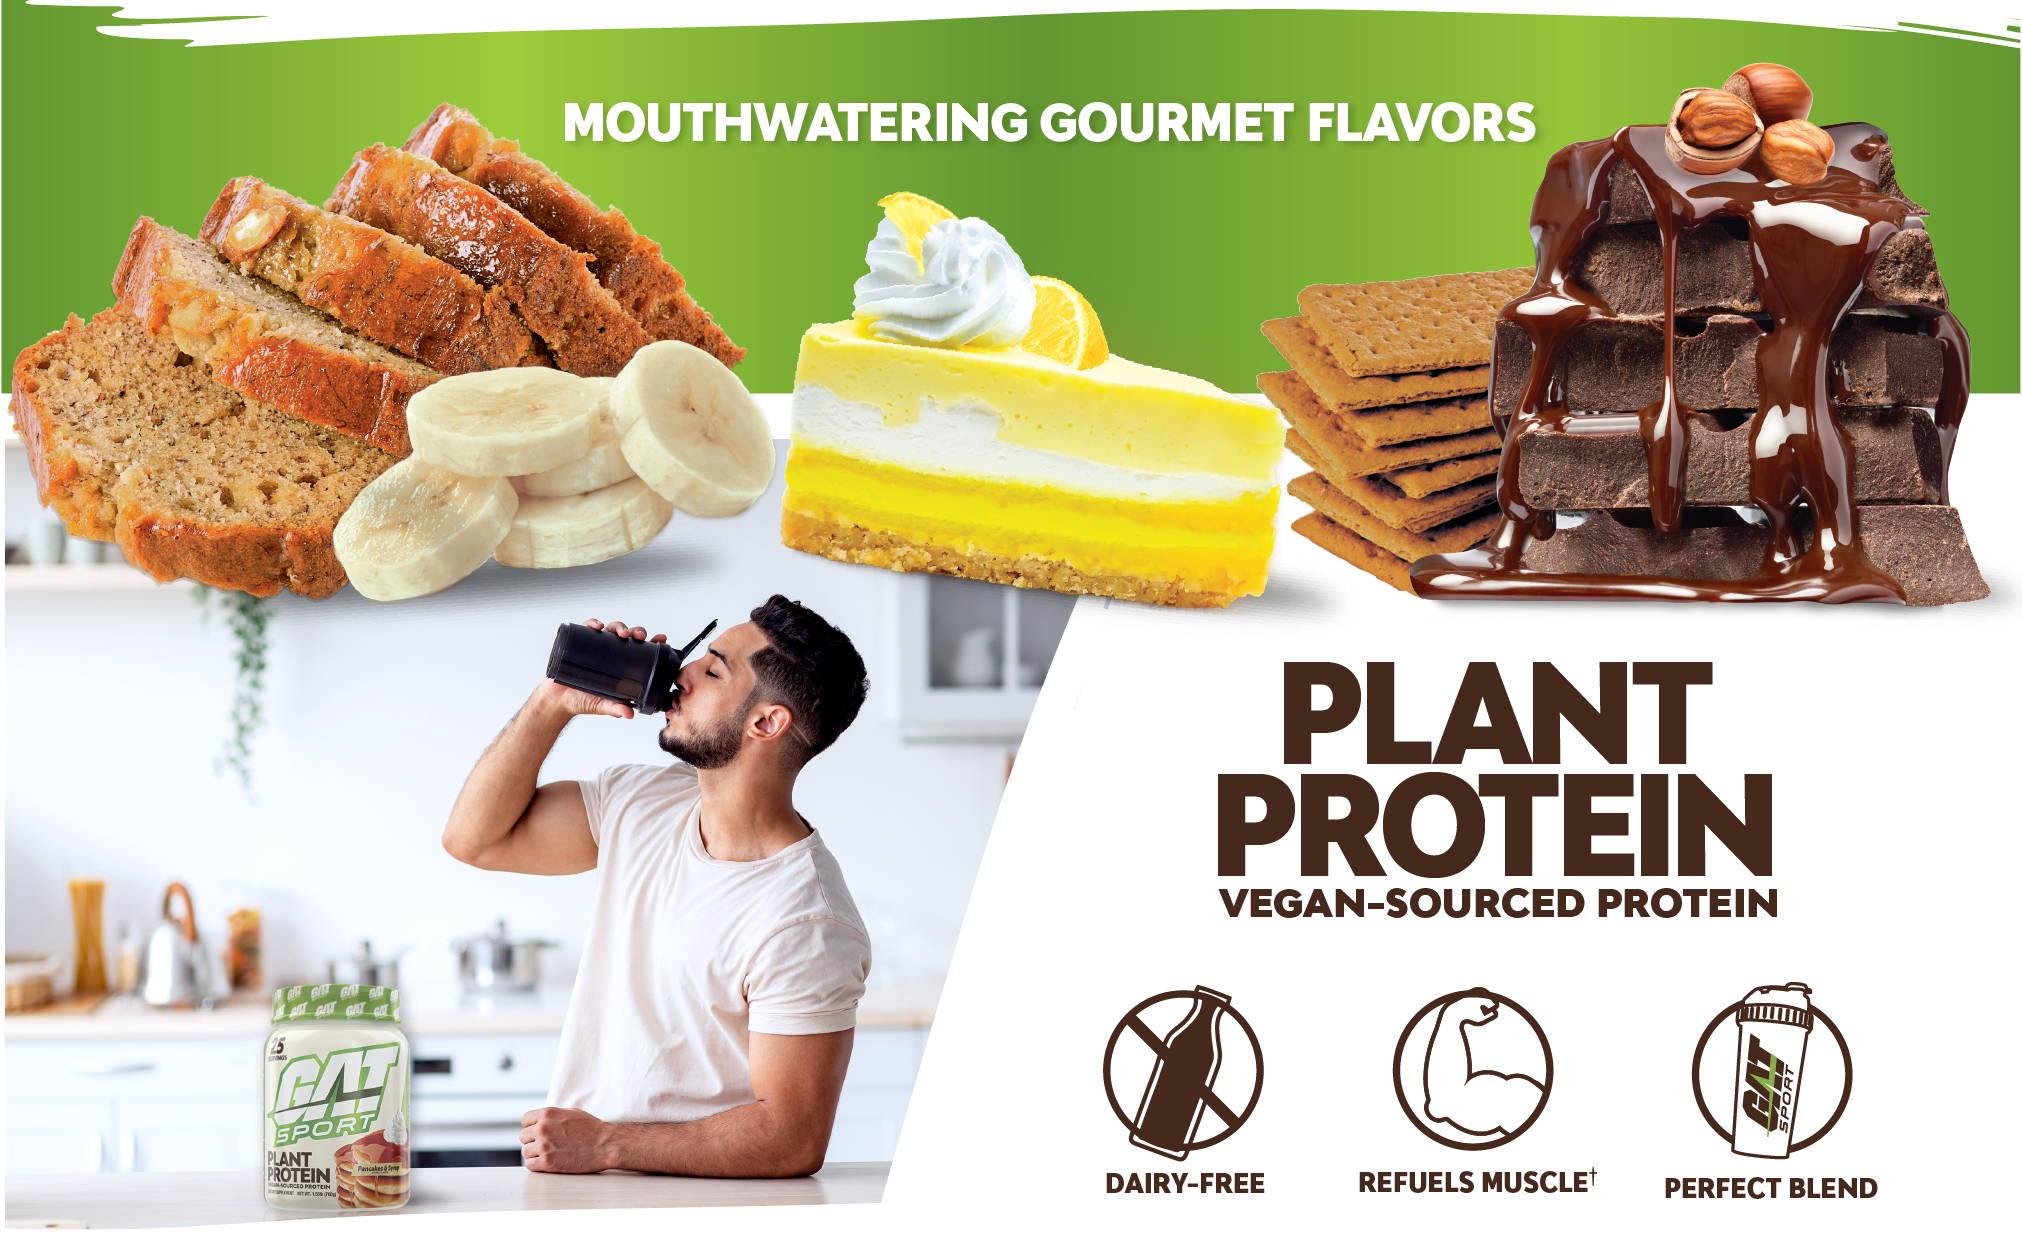 Mouthwatering gourmet flavors, vegan-sourced plant protein